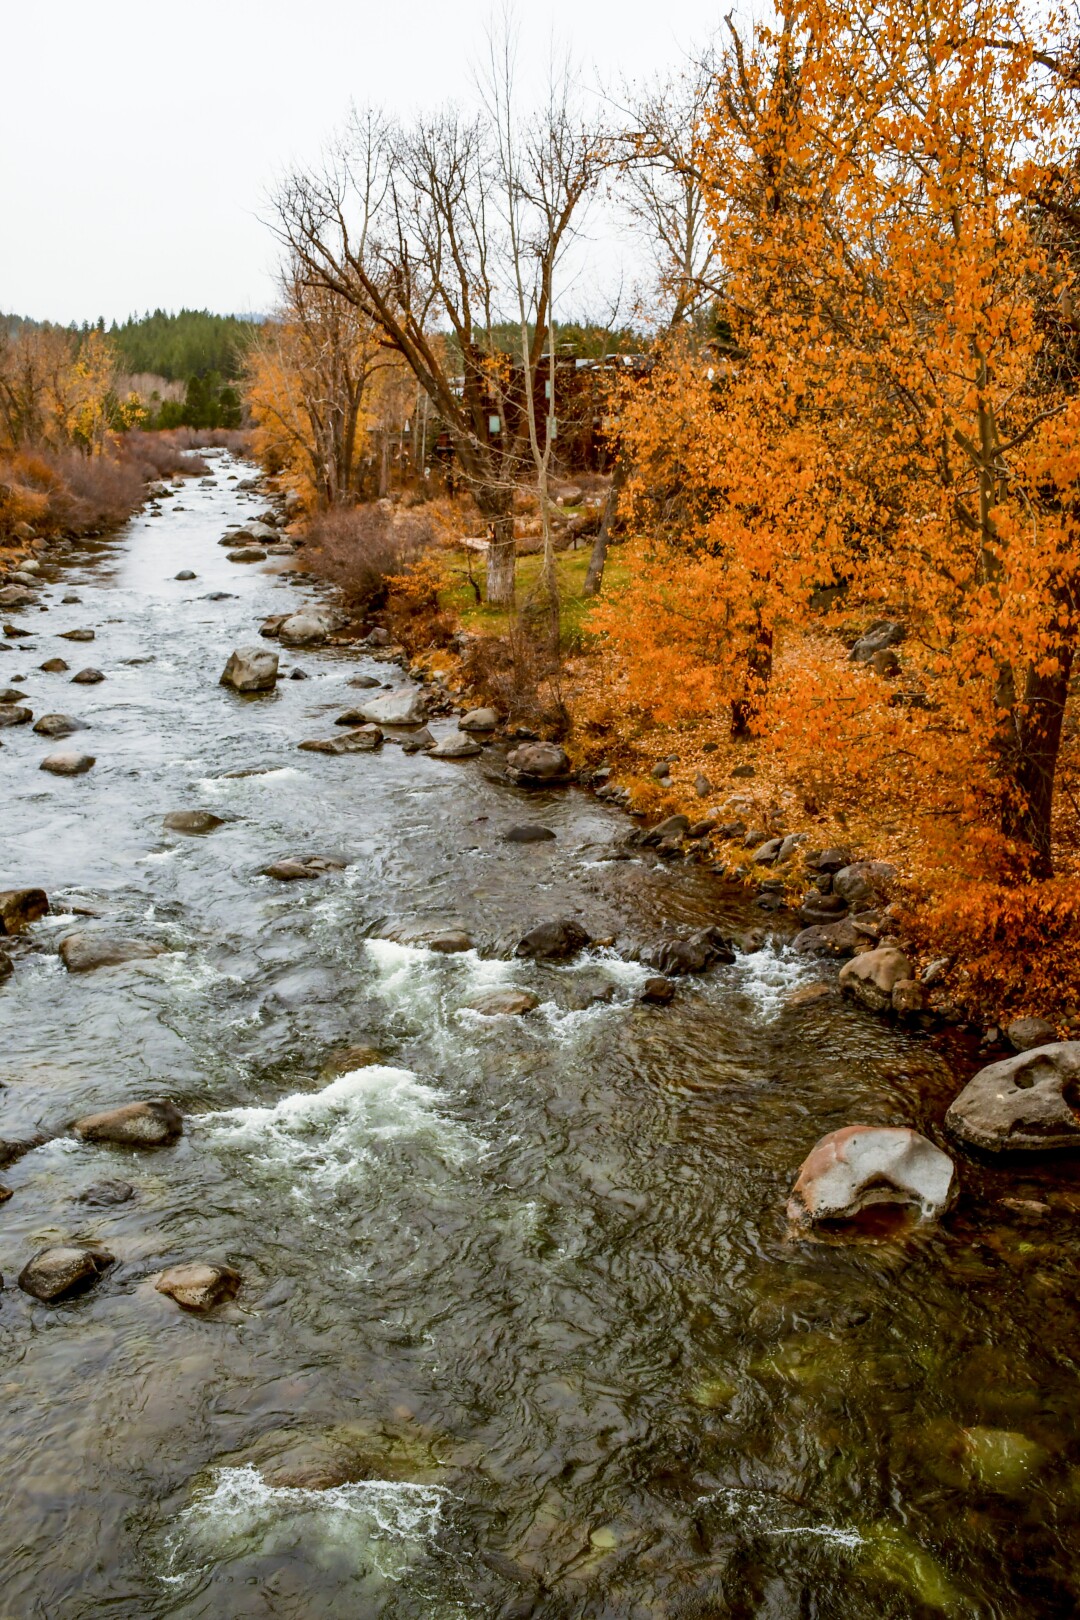 The Truckee River, sporting fall color, runs through downtown Truckee.